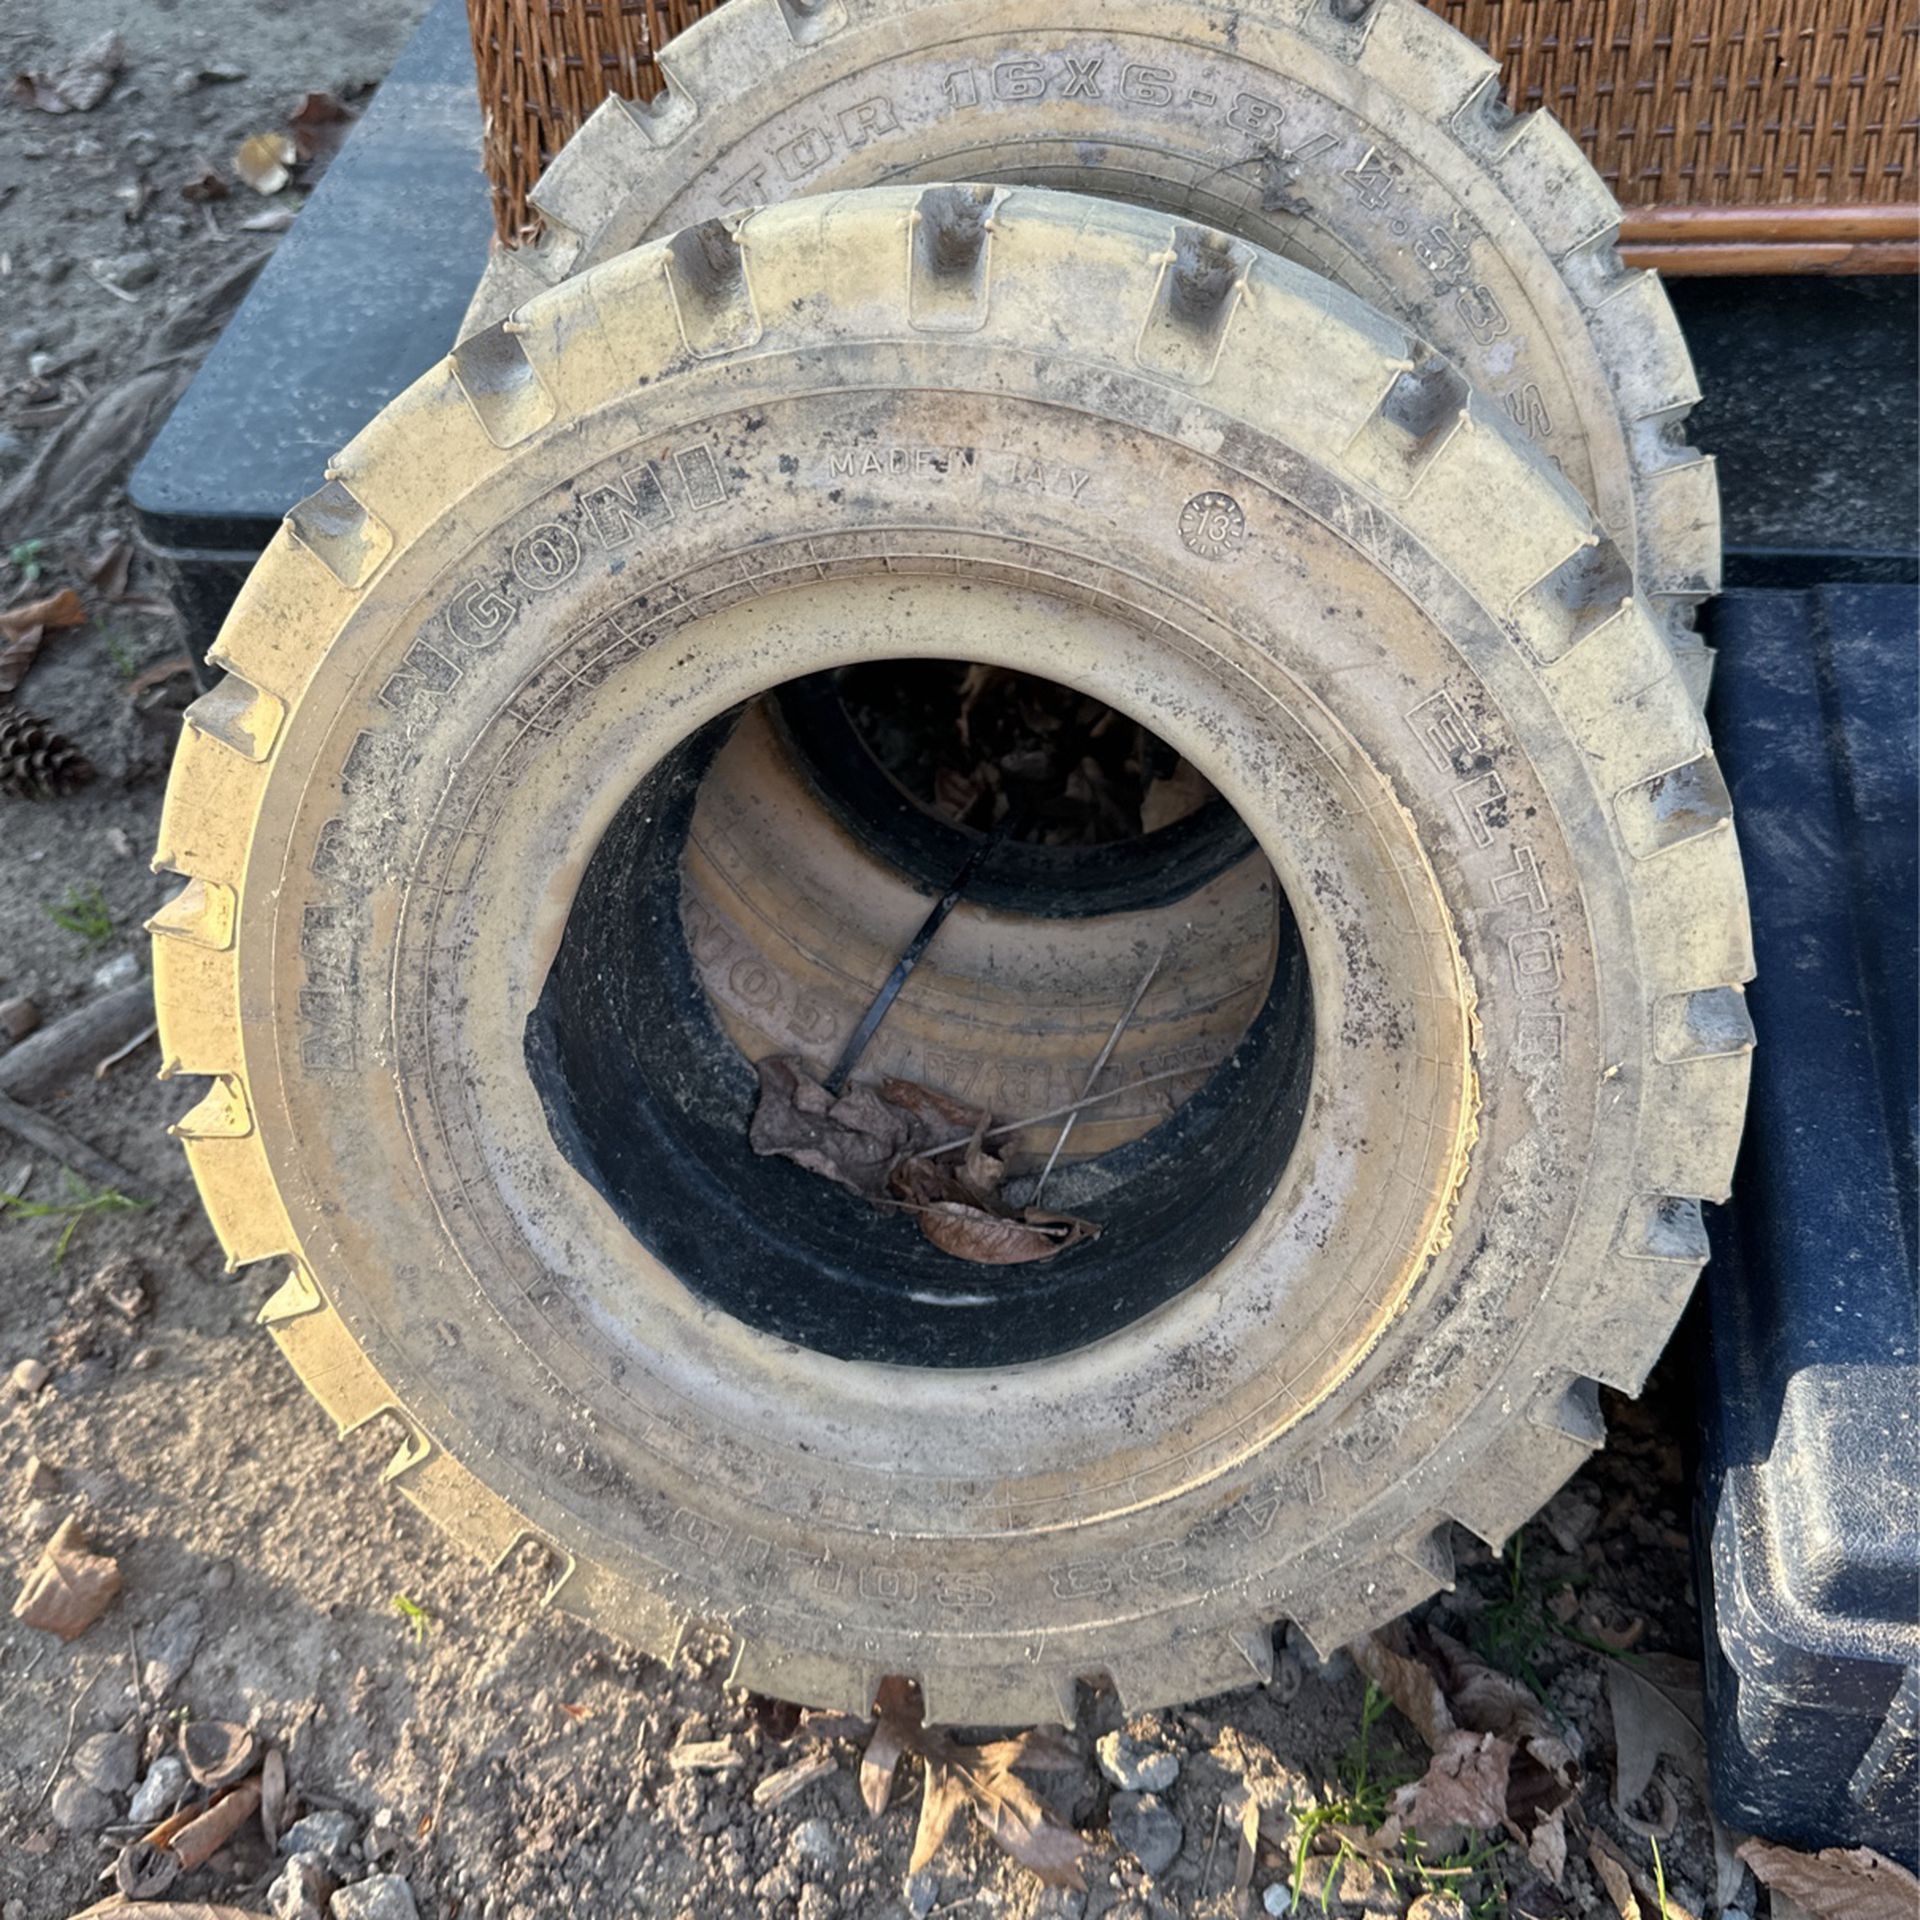 2 New Never Used Forklift Tires 